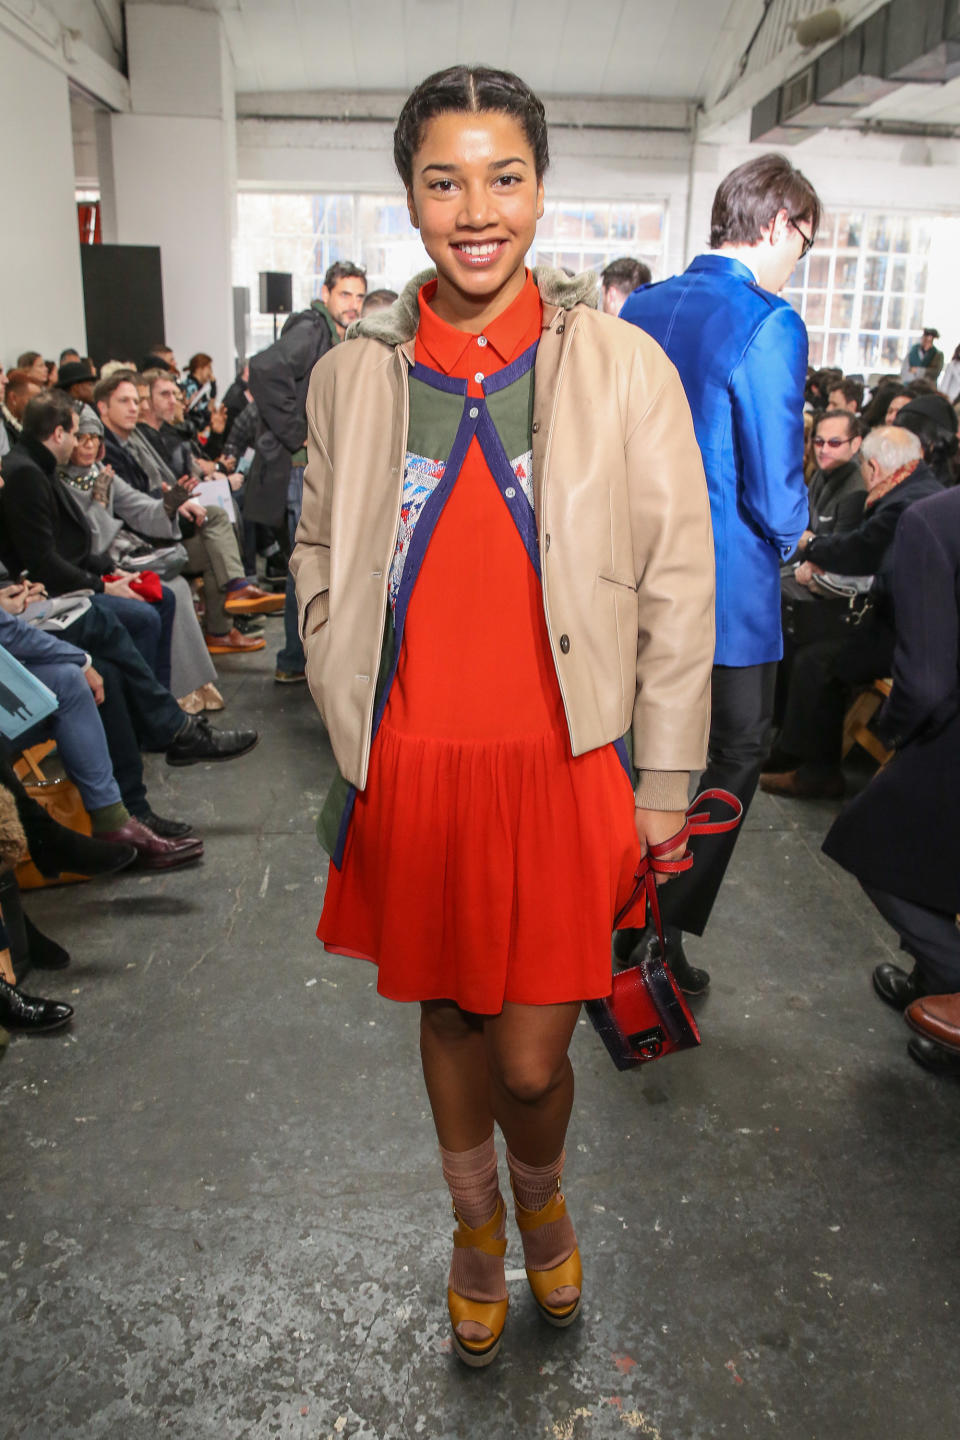 NEW YORK, NY - FEBRUARY 07:  DJ Hannah Bronfman attends the Duckie Brown fall 2013 fashion show during Mercedes-Benz Fashion Week at Industria Superstudio on February 7, 2013 in New York City.  (Photo by Chelsea Lauren/Getty Images)